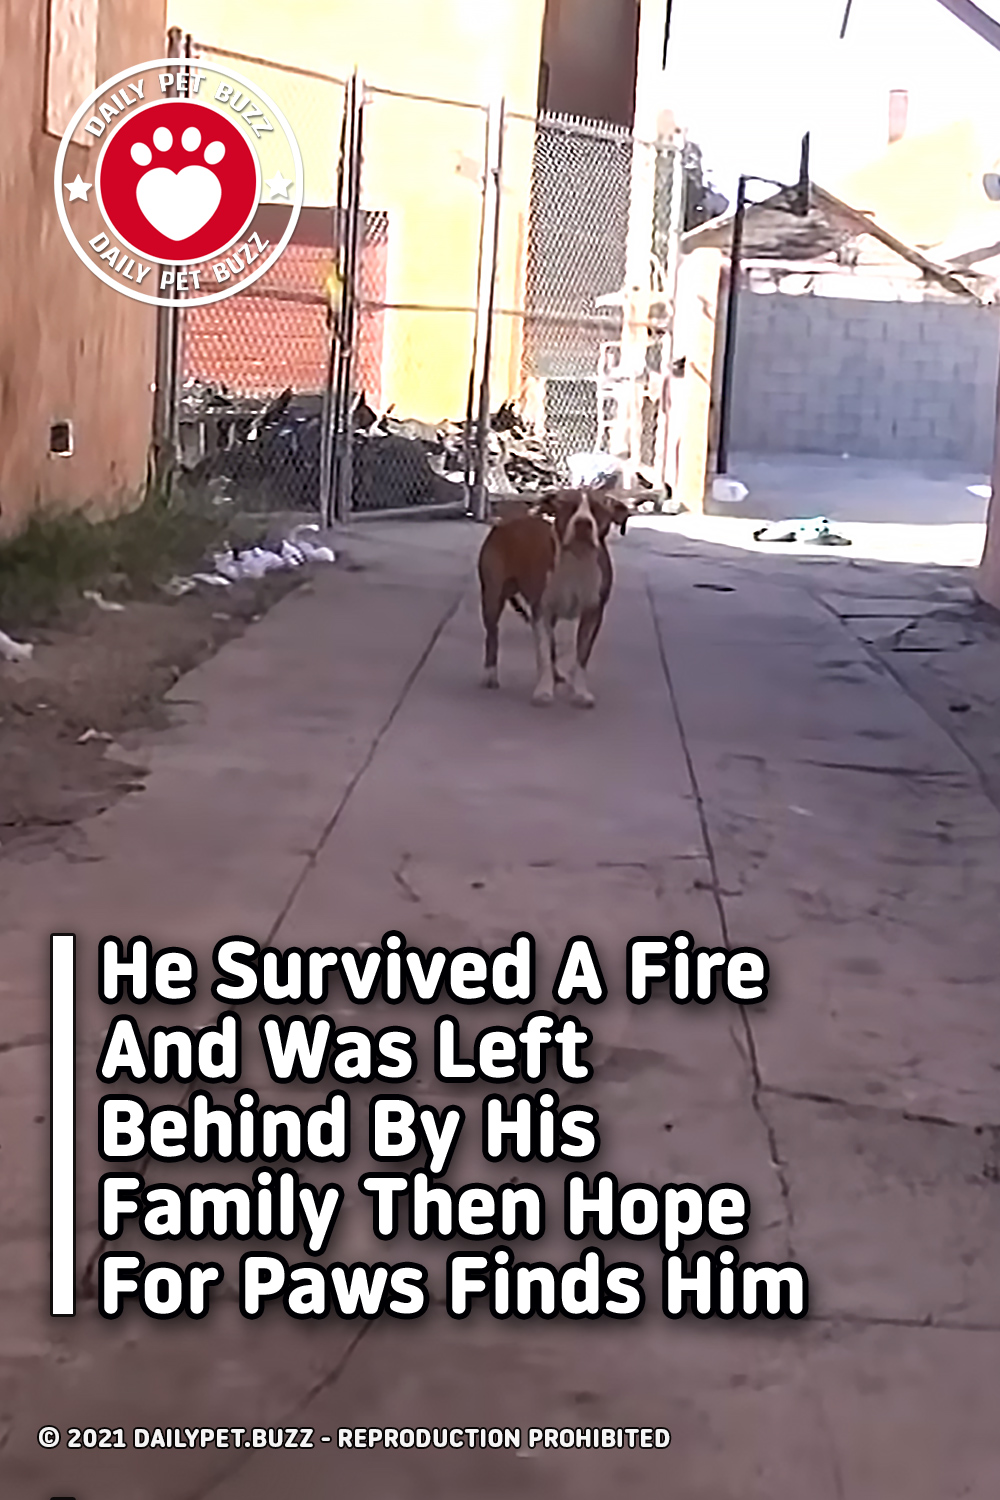 He Survived A Fire And Was Left Behind By His Family Then Hope For Paws Finds Him